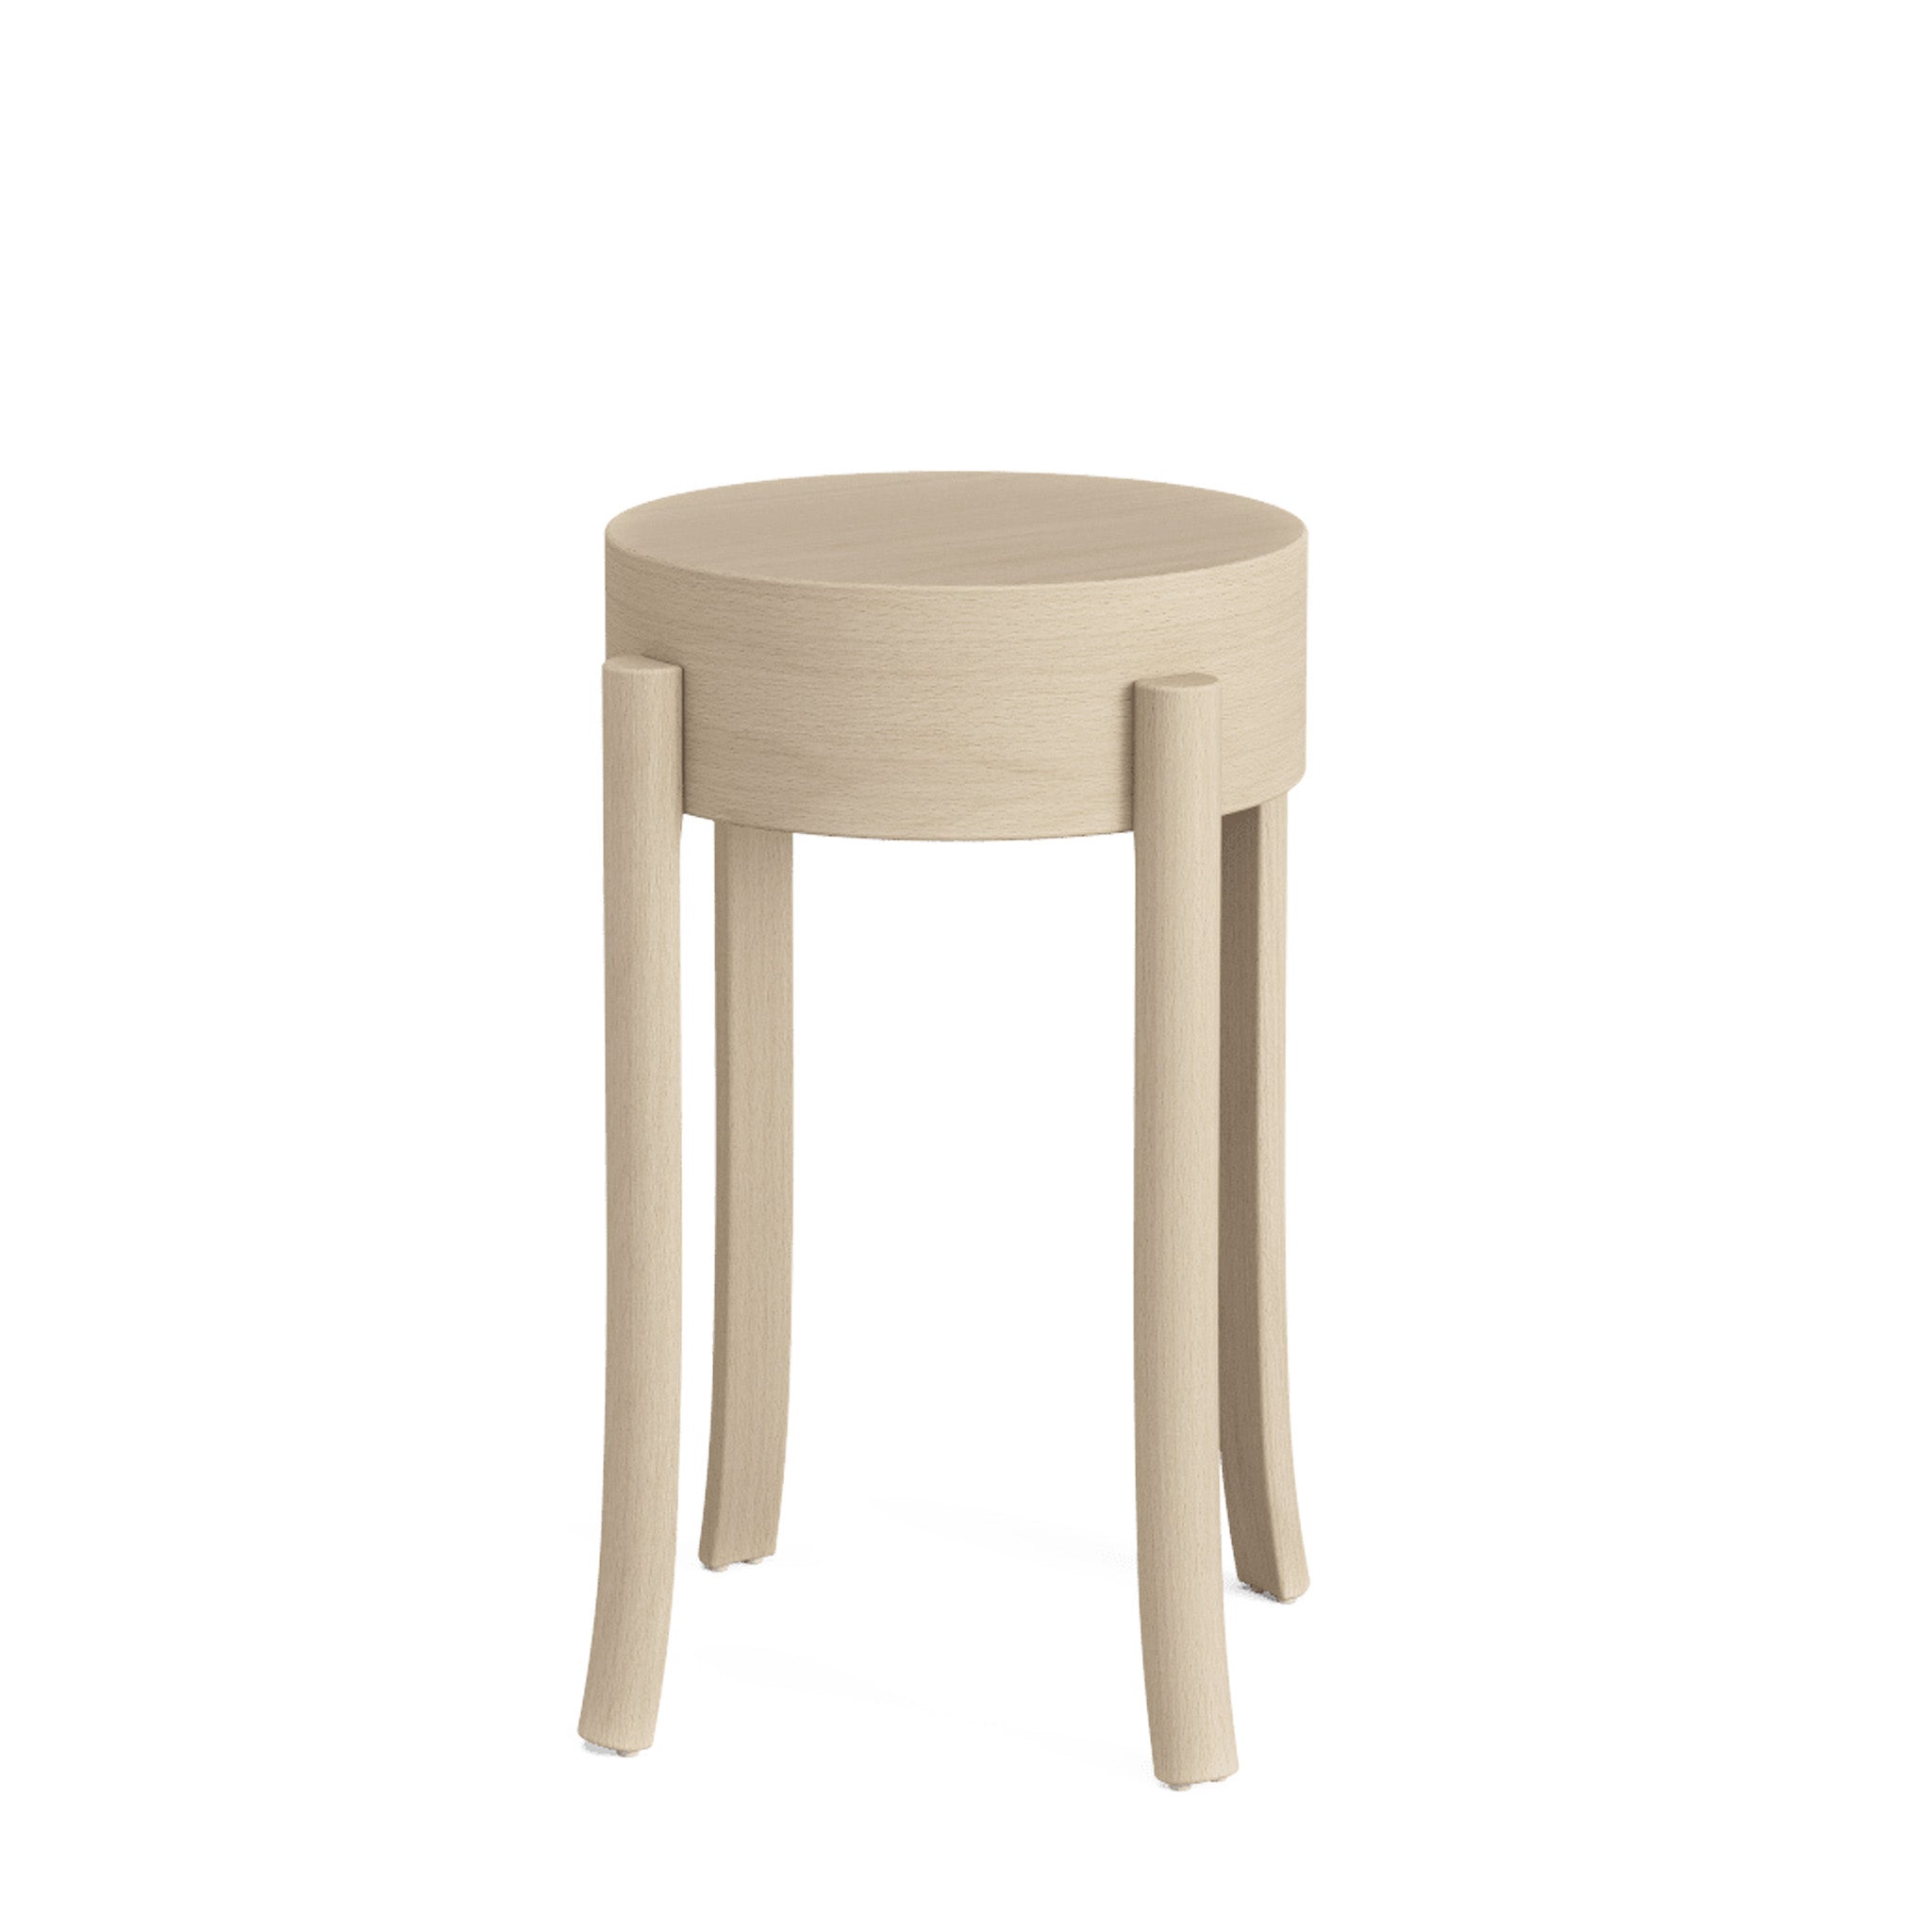 Avavick Stool by Katja Pettersson for Swedese